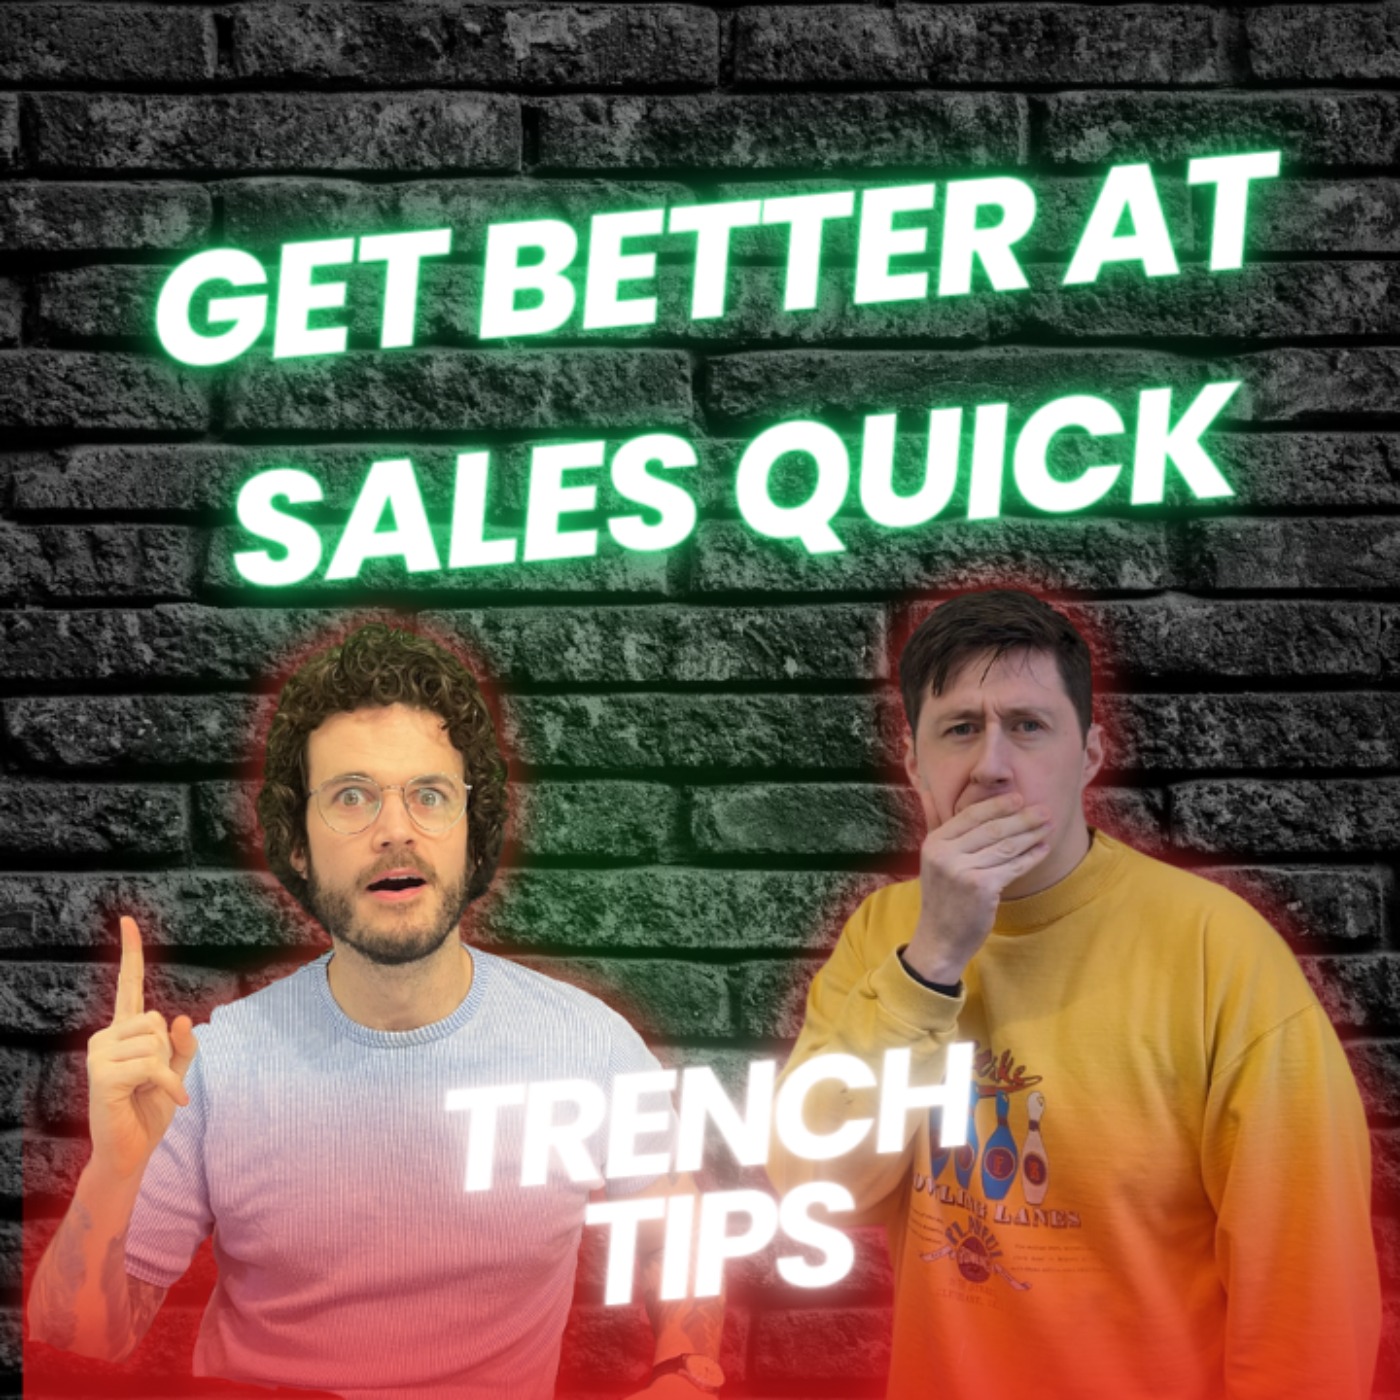 Get better at sales quick - Trench Tips